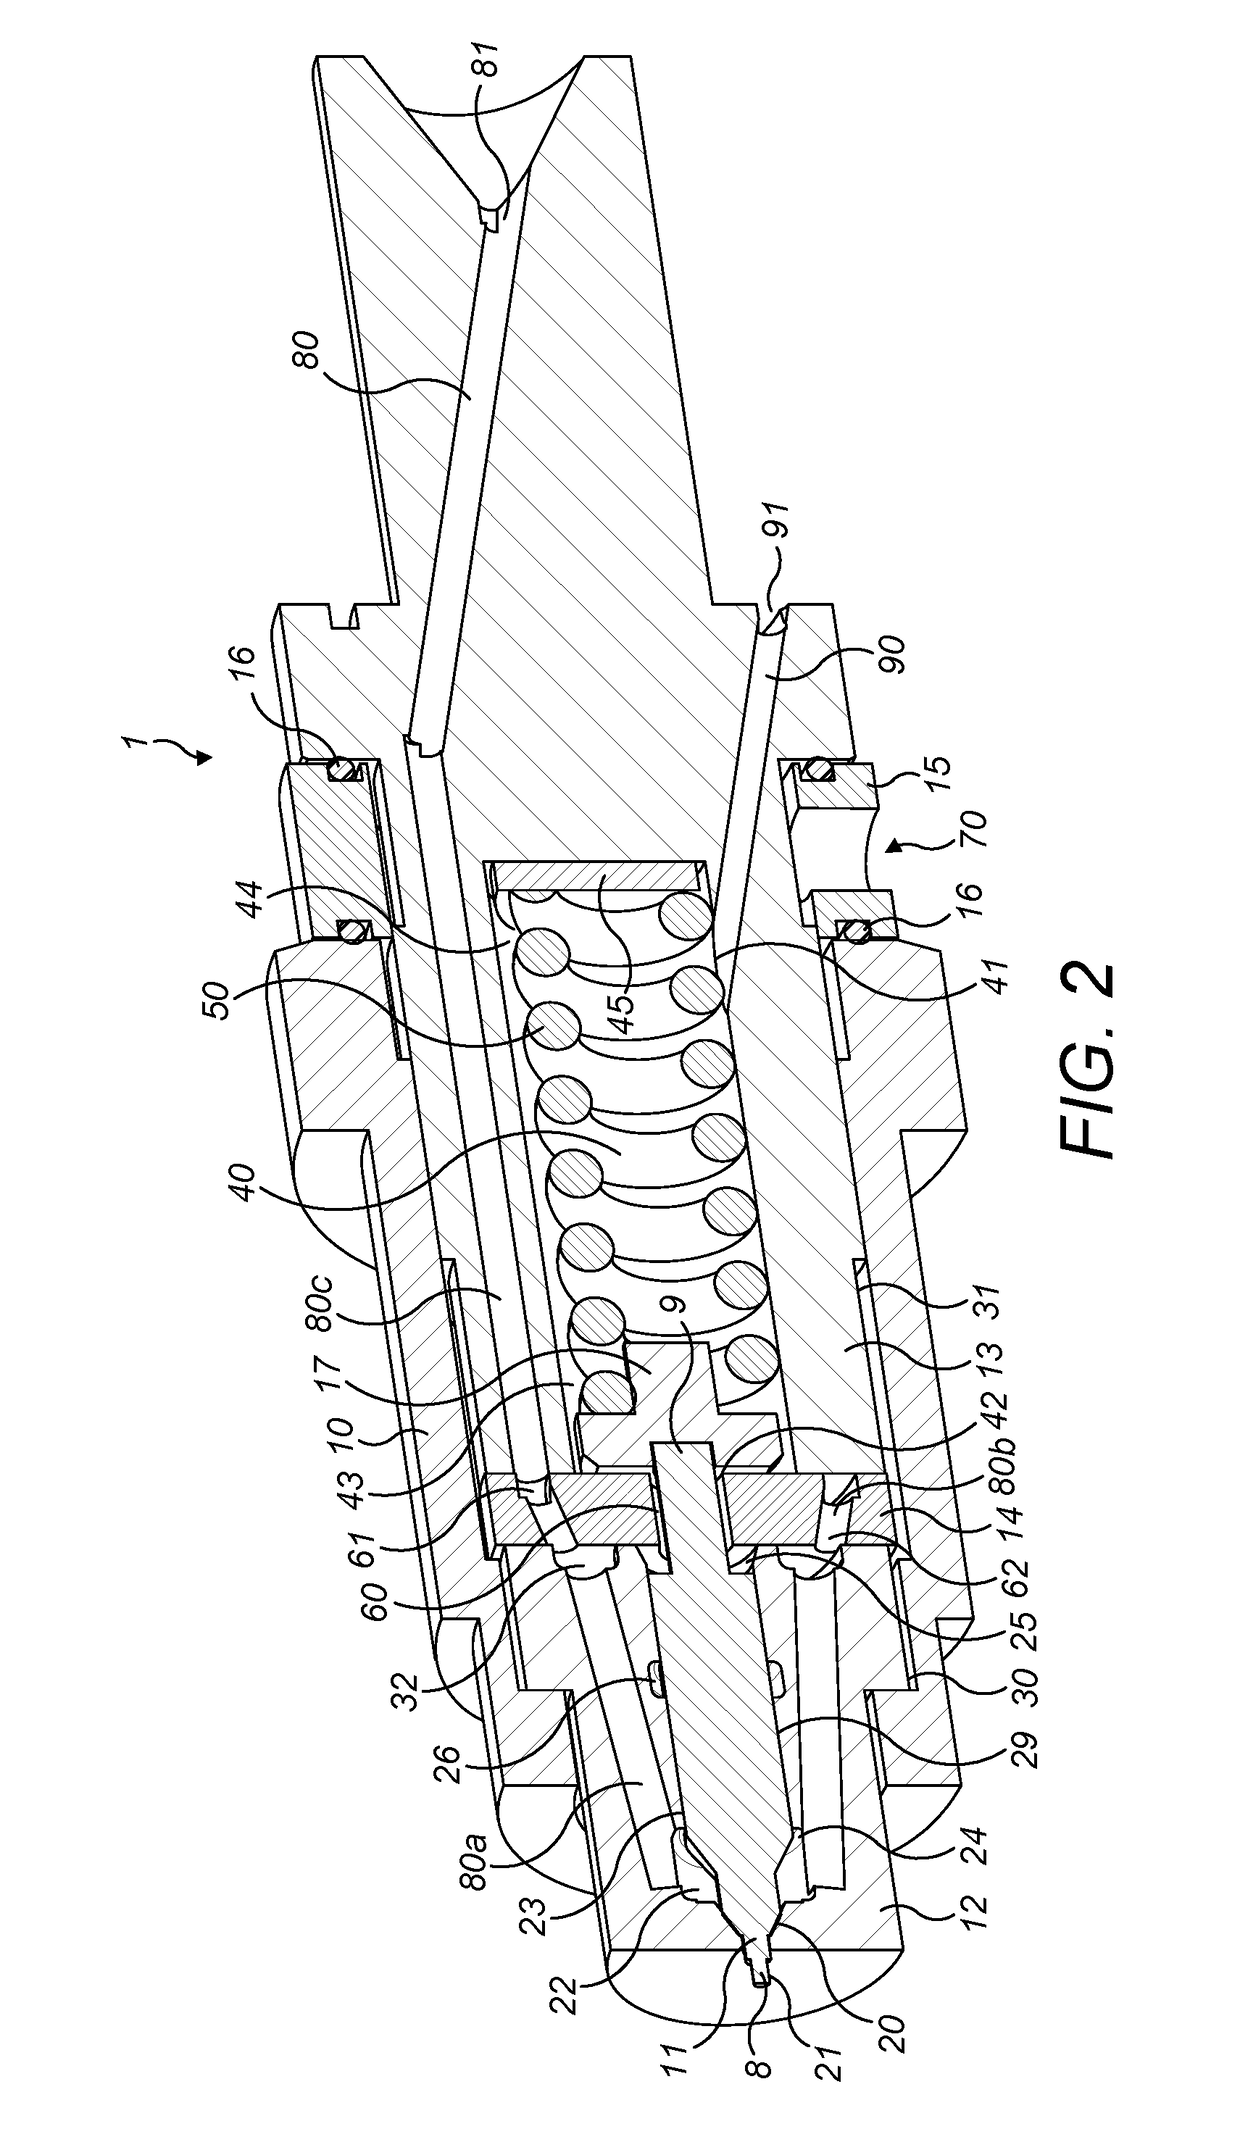 Fuel Injector, a Fuel Injector Assembly and an Associated Method